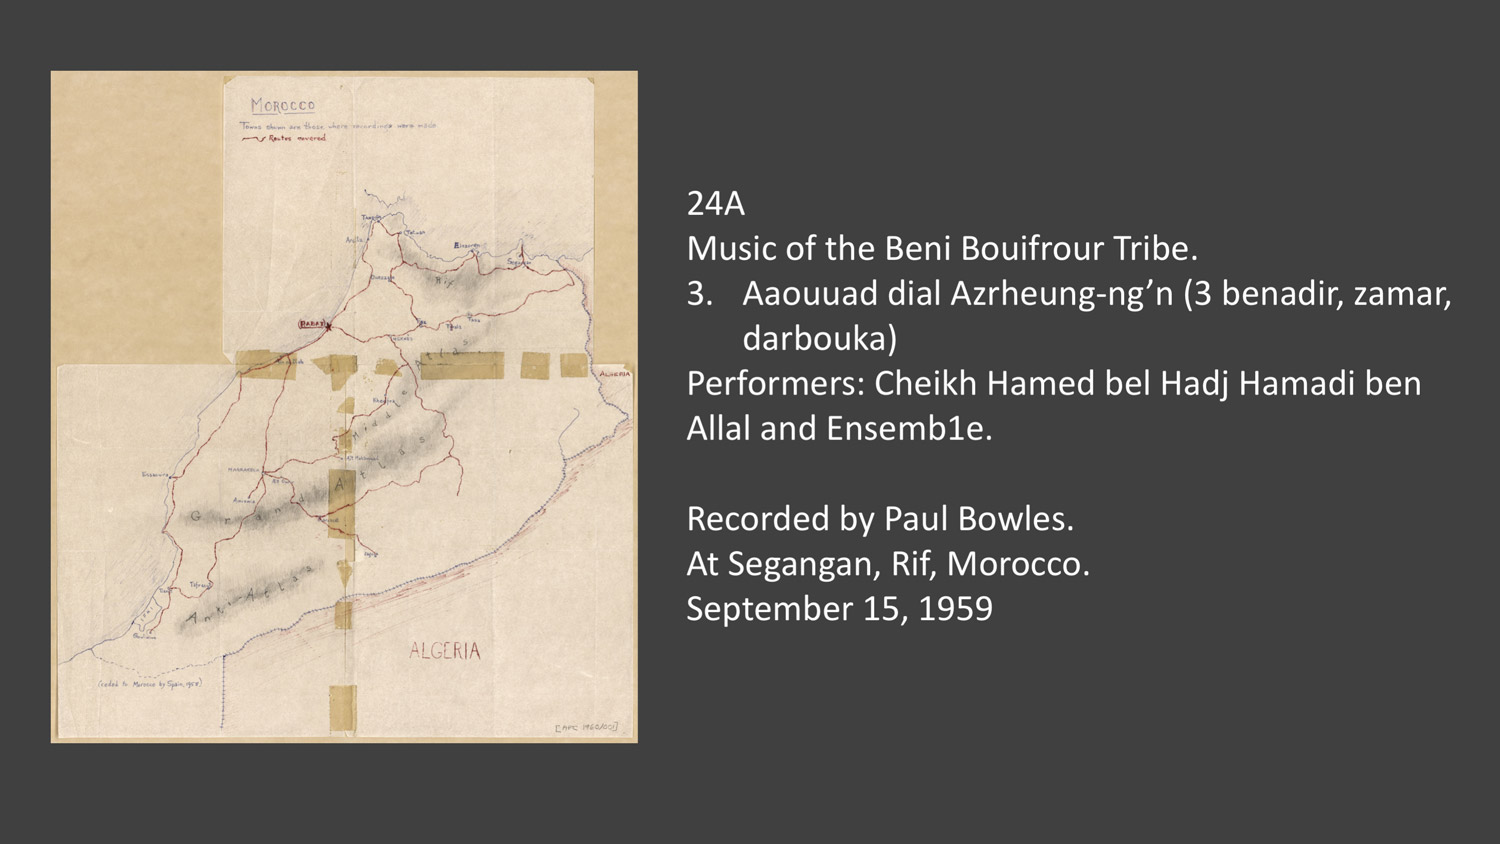 24A-3 Aaouuad dial Azrheung-ng’n (3 benadir, zamar, darbouka)<div>Music of the Beni Bouifrour Tribe.</div><div>Performers: Cheikh Hamed bel Hadj Hamadi ben Allal and Ensemble.</div>